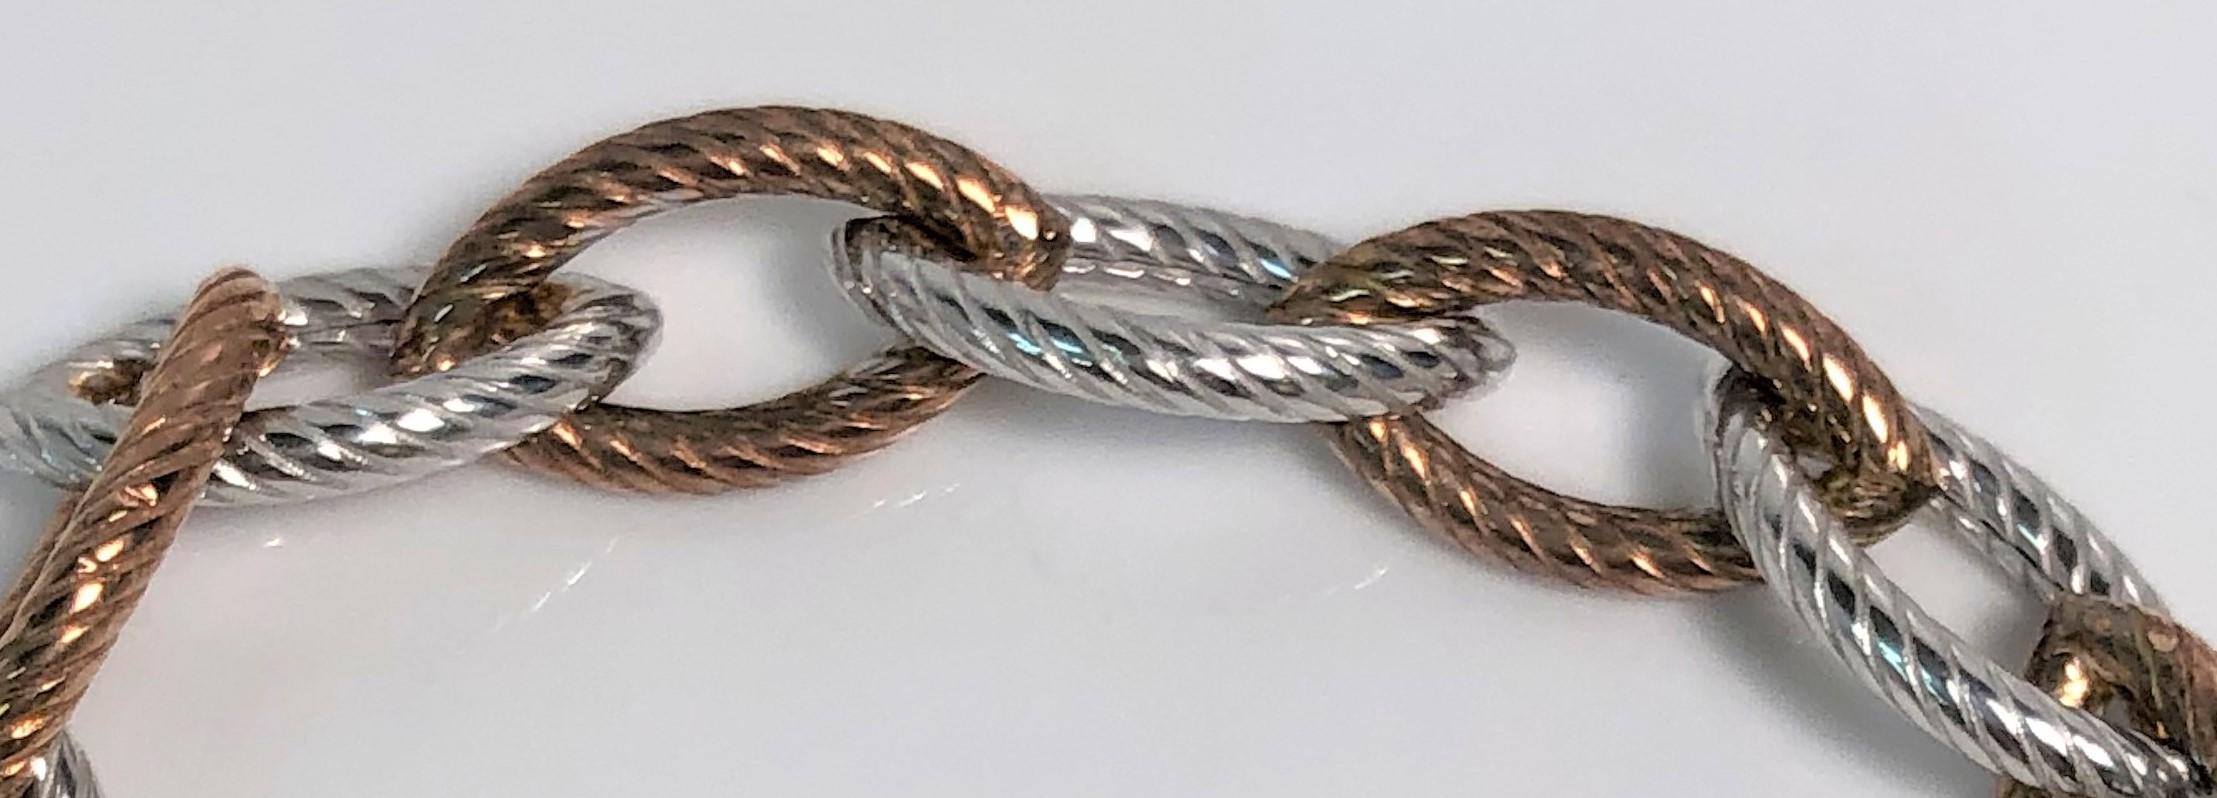 This bracelet is perfect for someone who wears mixed metal colors or just loves a different styled charm bracelet.  
The ribbed oval links alternate between a rose color and sterling silver.  
Perfect for a charm bracelet, combined with other